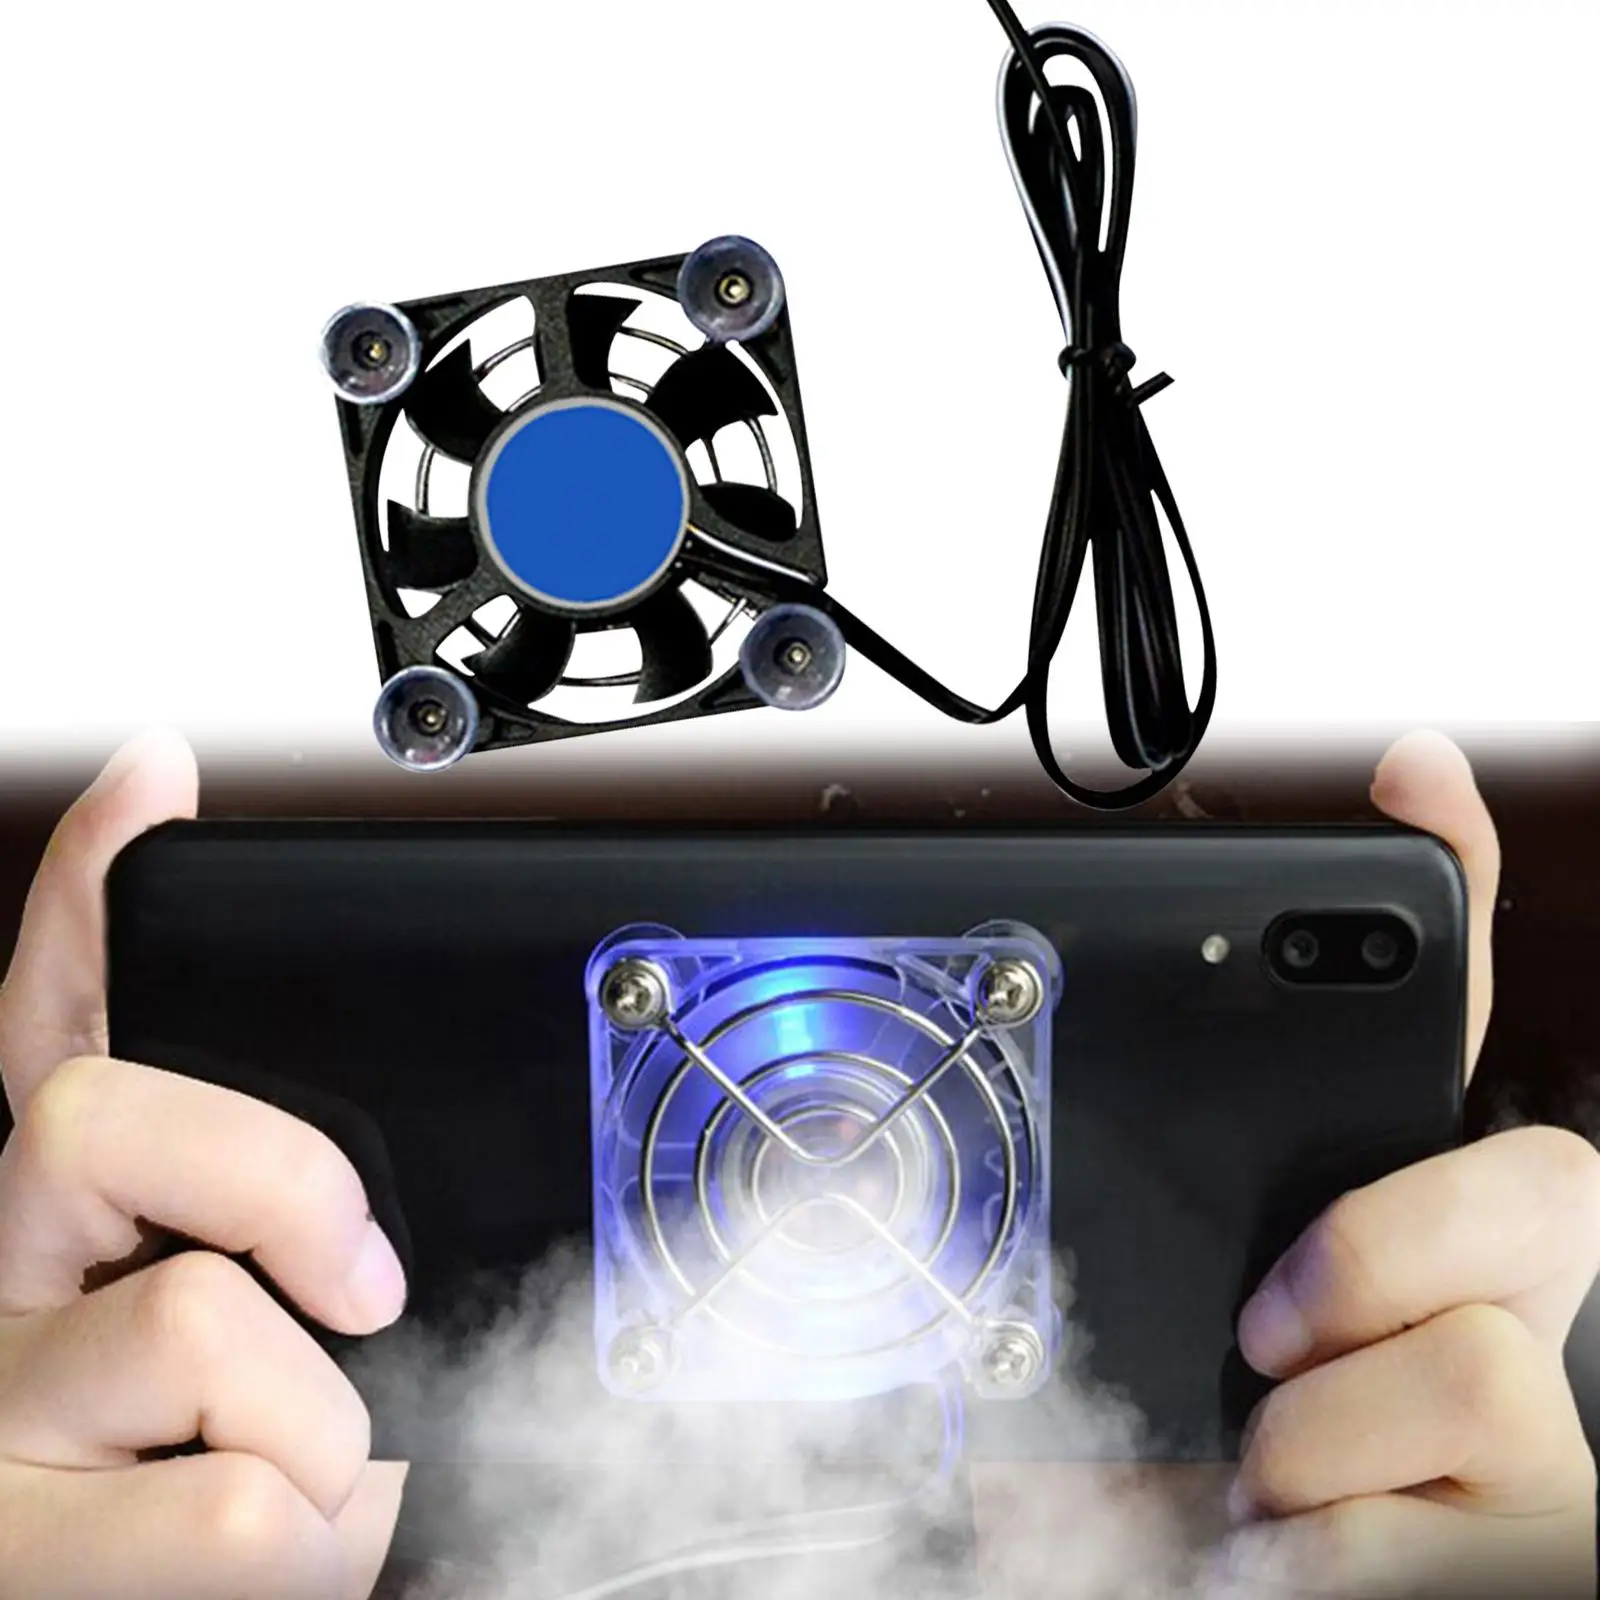 USB Charging Phone Cooling Fan Cooler Mute Mini Portable Cellphone Radiator for Live Smartphones Video